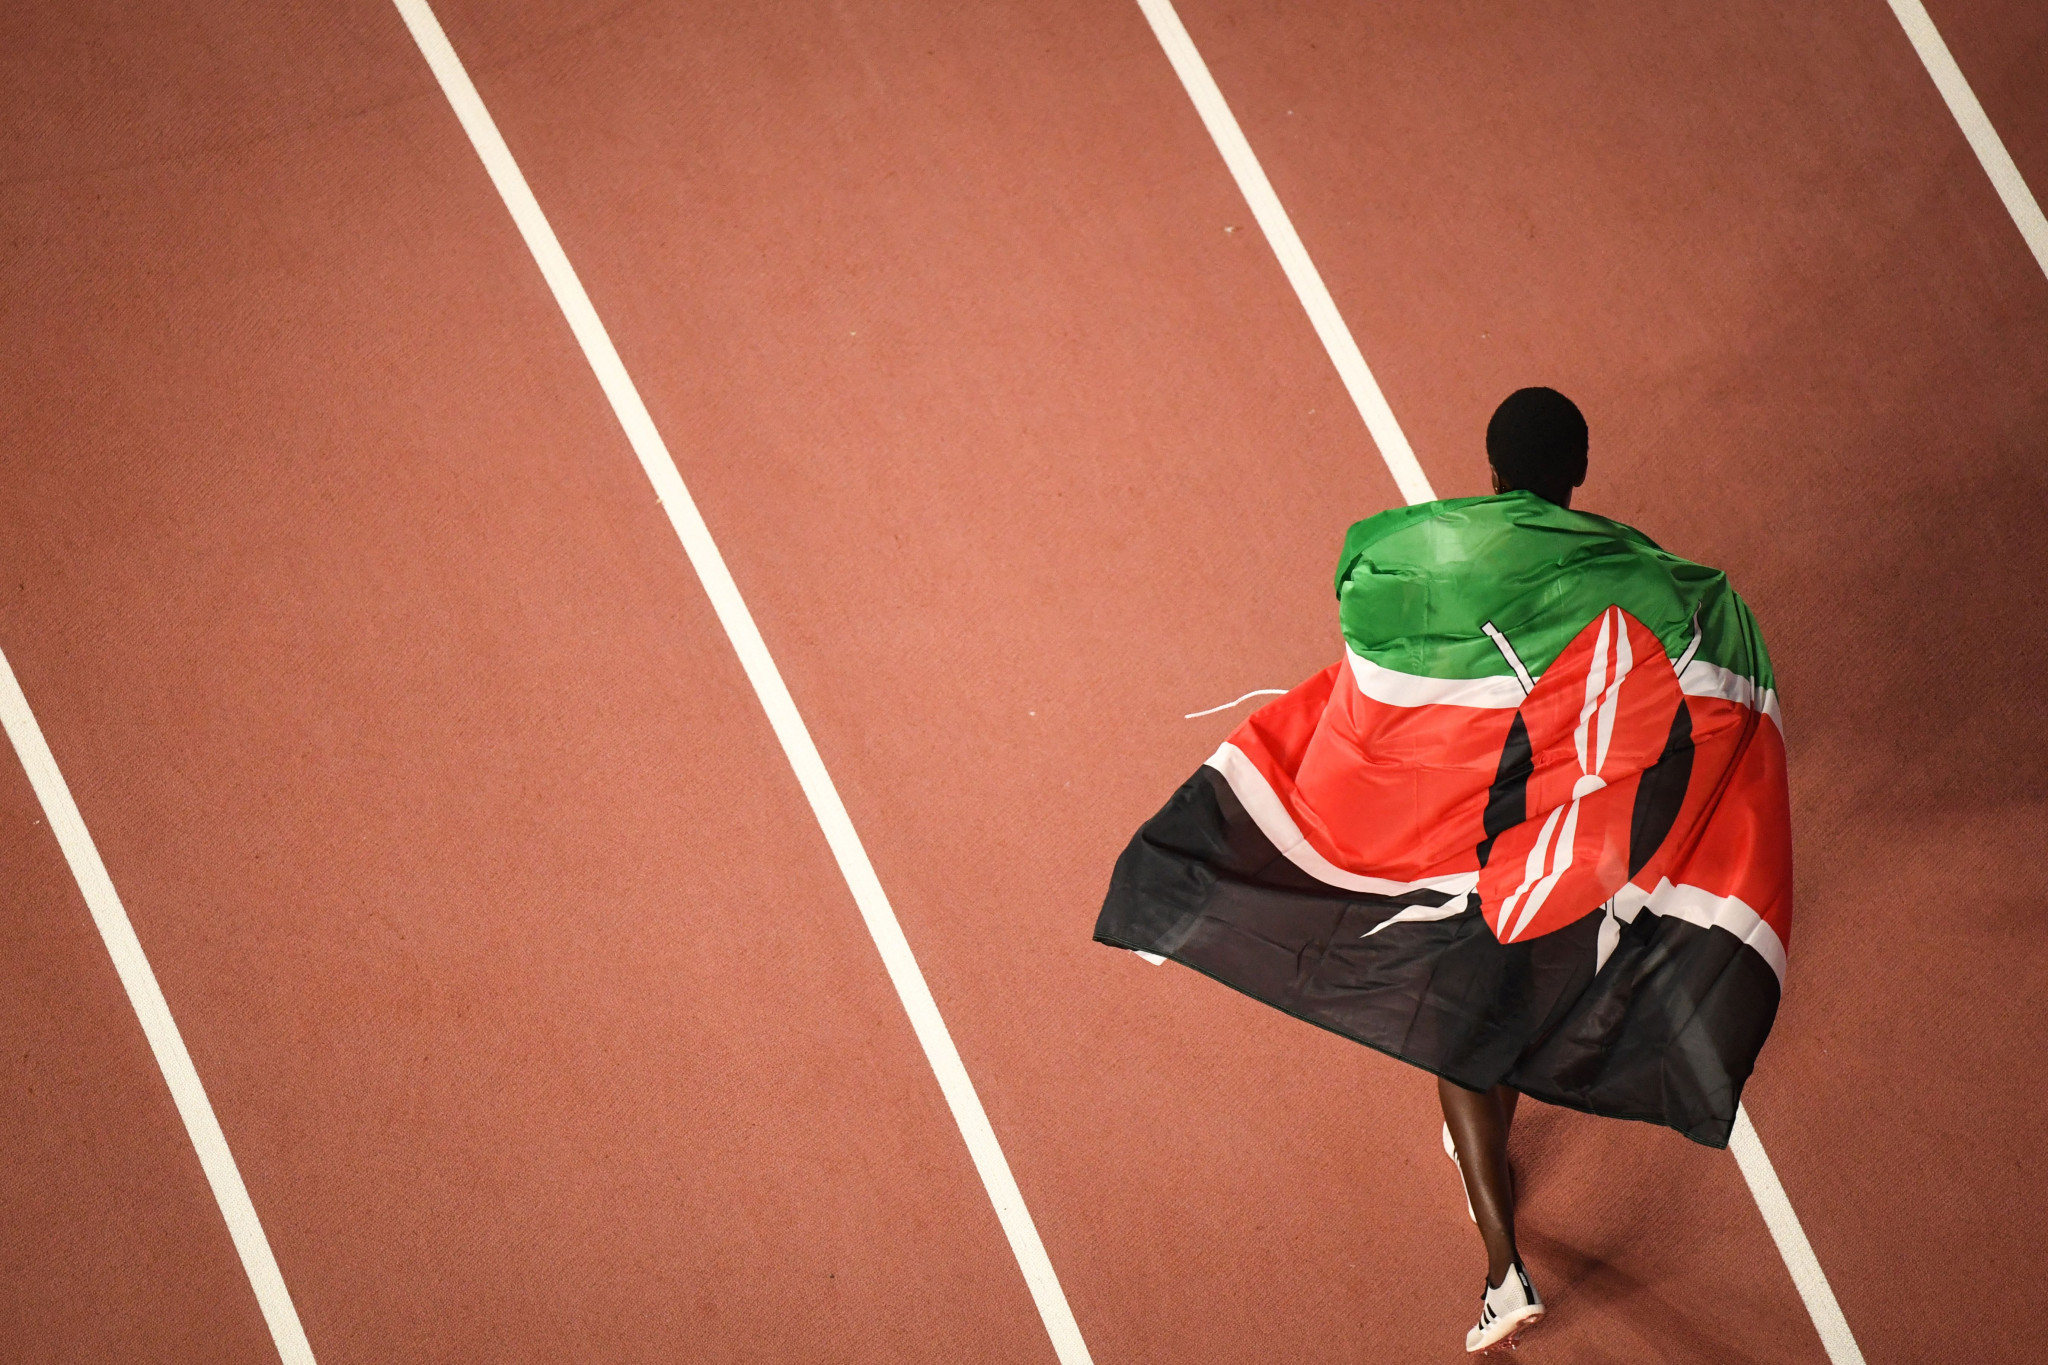 Kenyan runner Wambui banned for seven years over positive test and cover-up